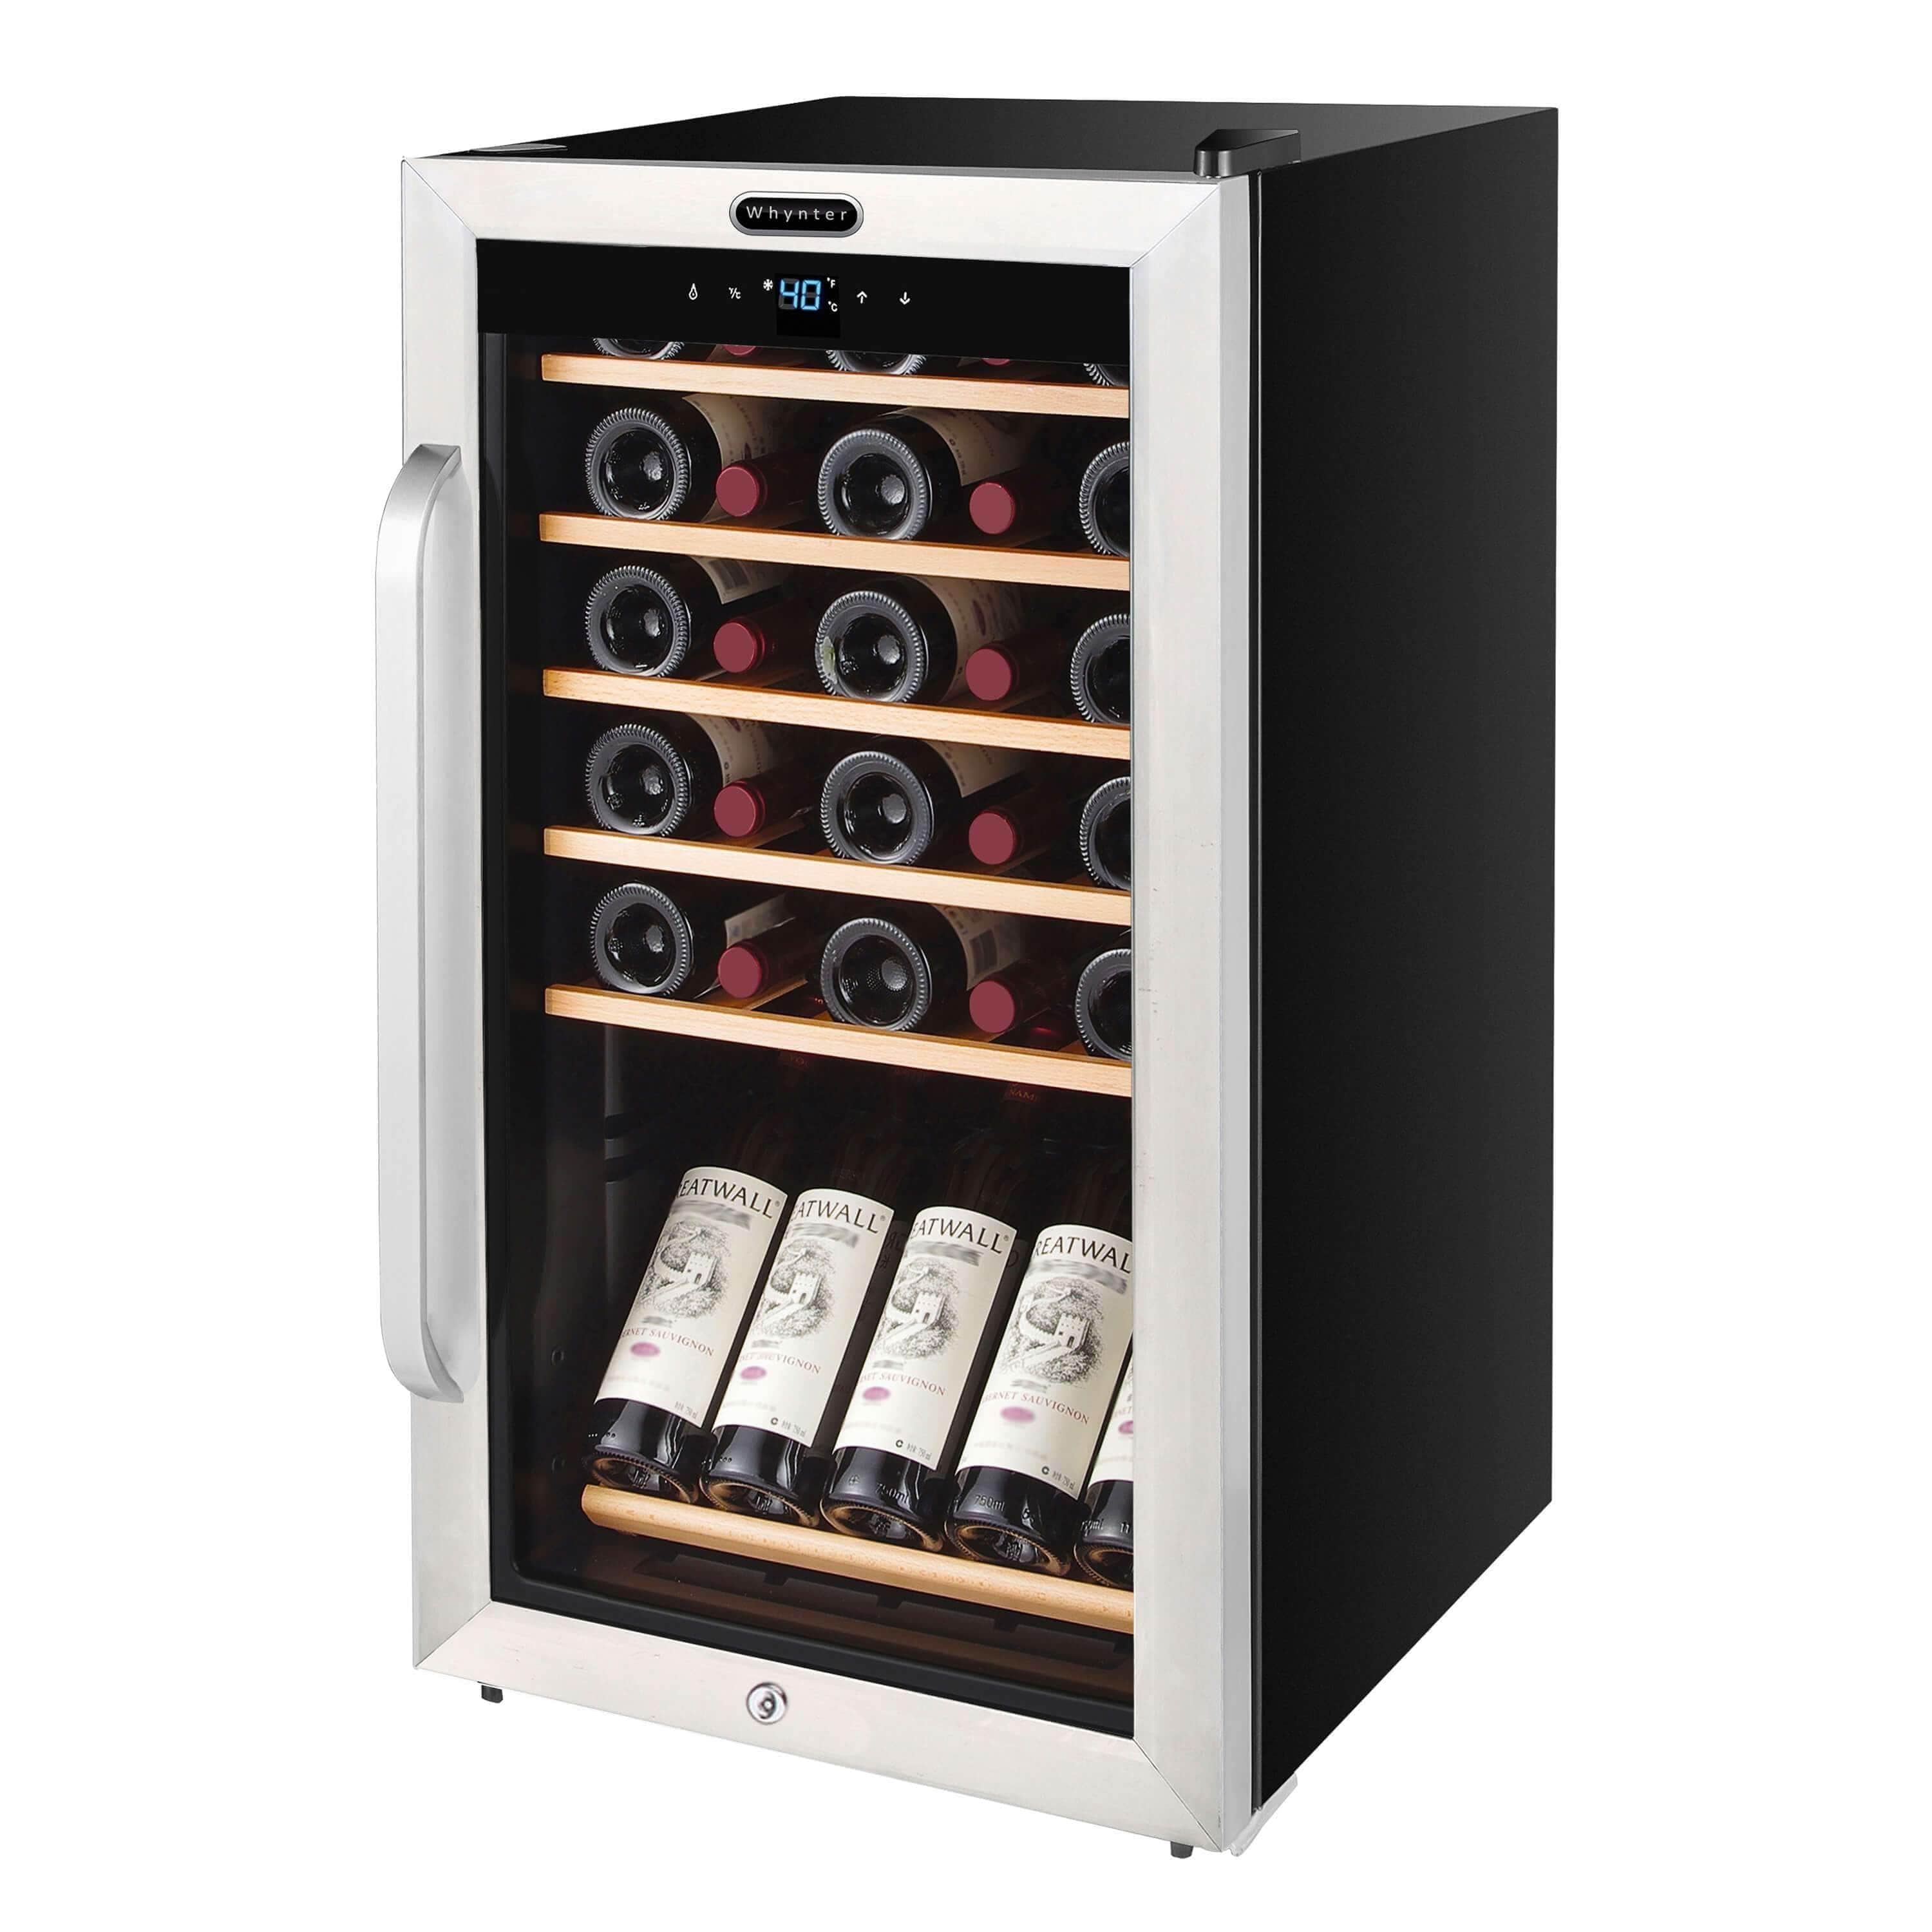 Whynter 34 Bottle Freestanding Stainless Steel Refrigerator with Display Shelf and Digital Control FWC-341TS Wine Coolers FWC-341TS Luxury Appliances Direct